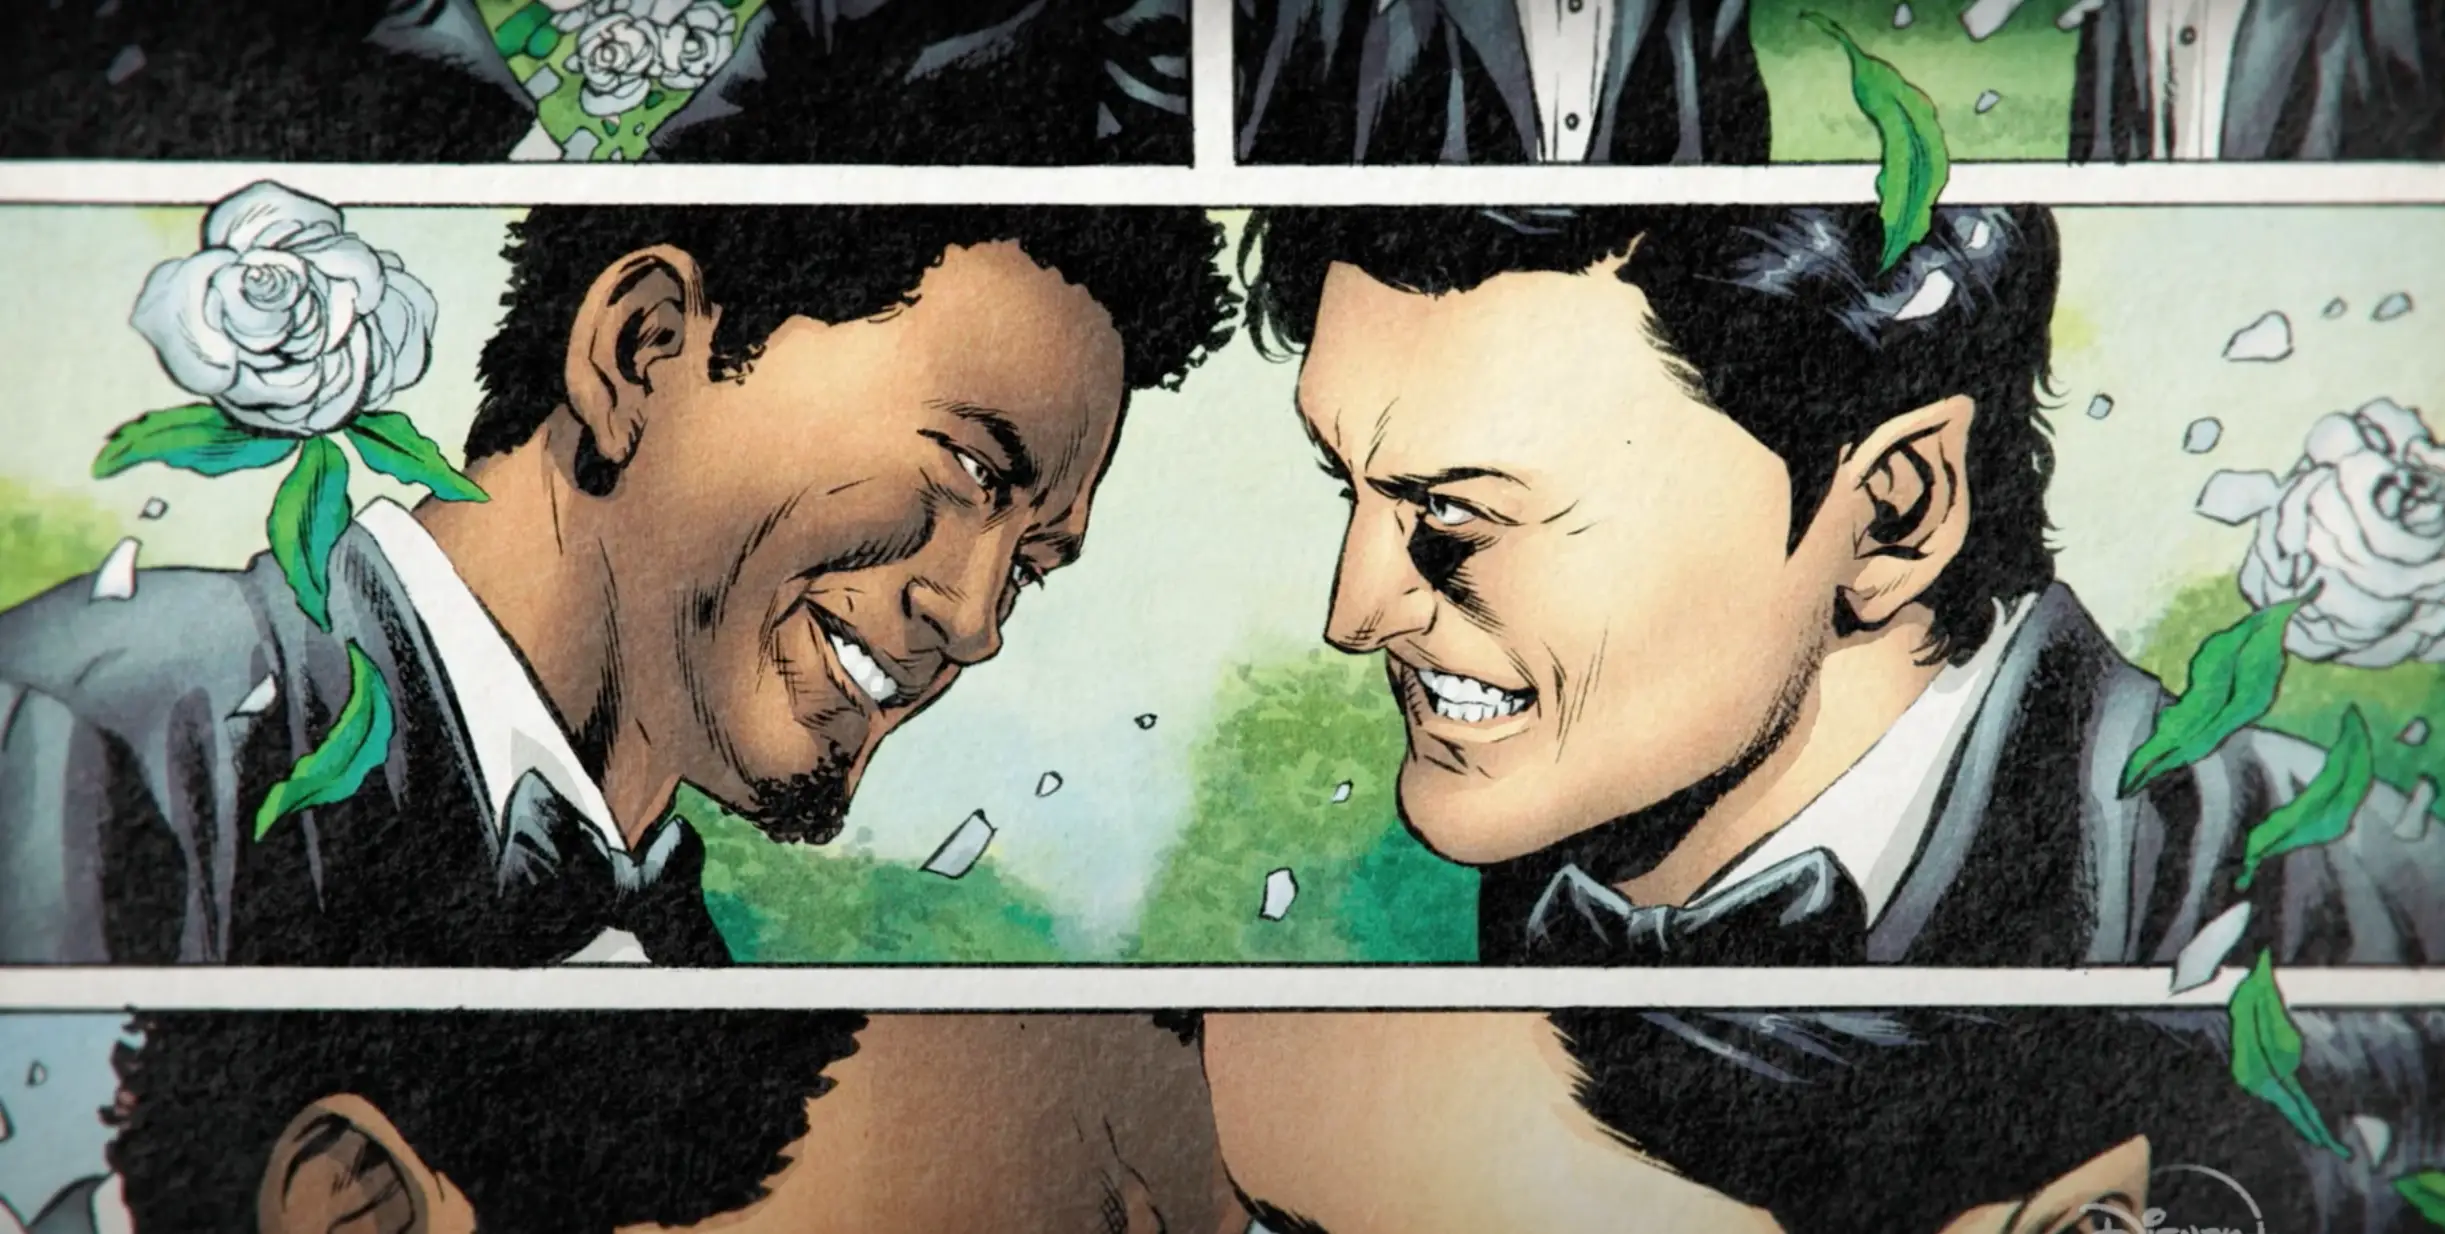 Marvel's Behind the Mask Trailer Cis Gay Relationship in Marvel Comics Breaks Barriers